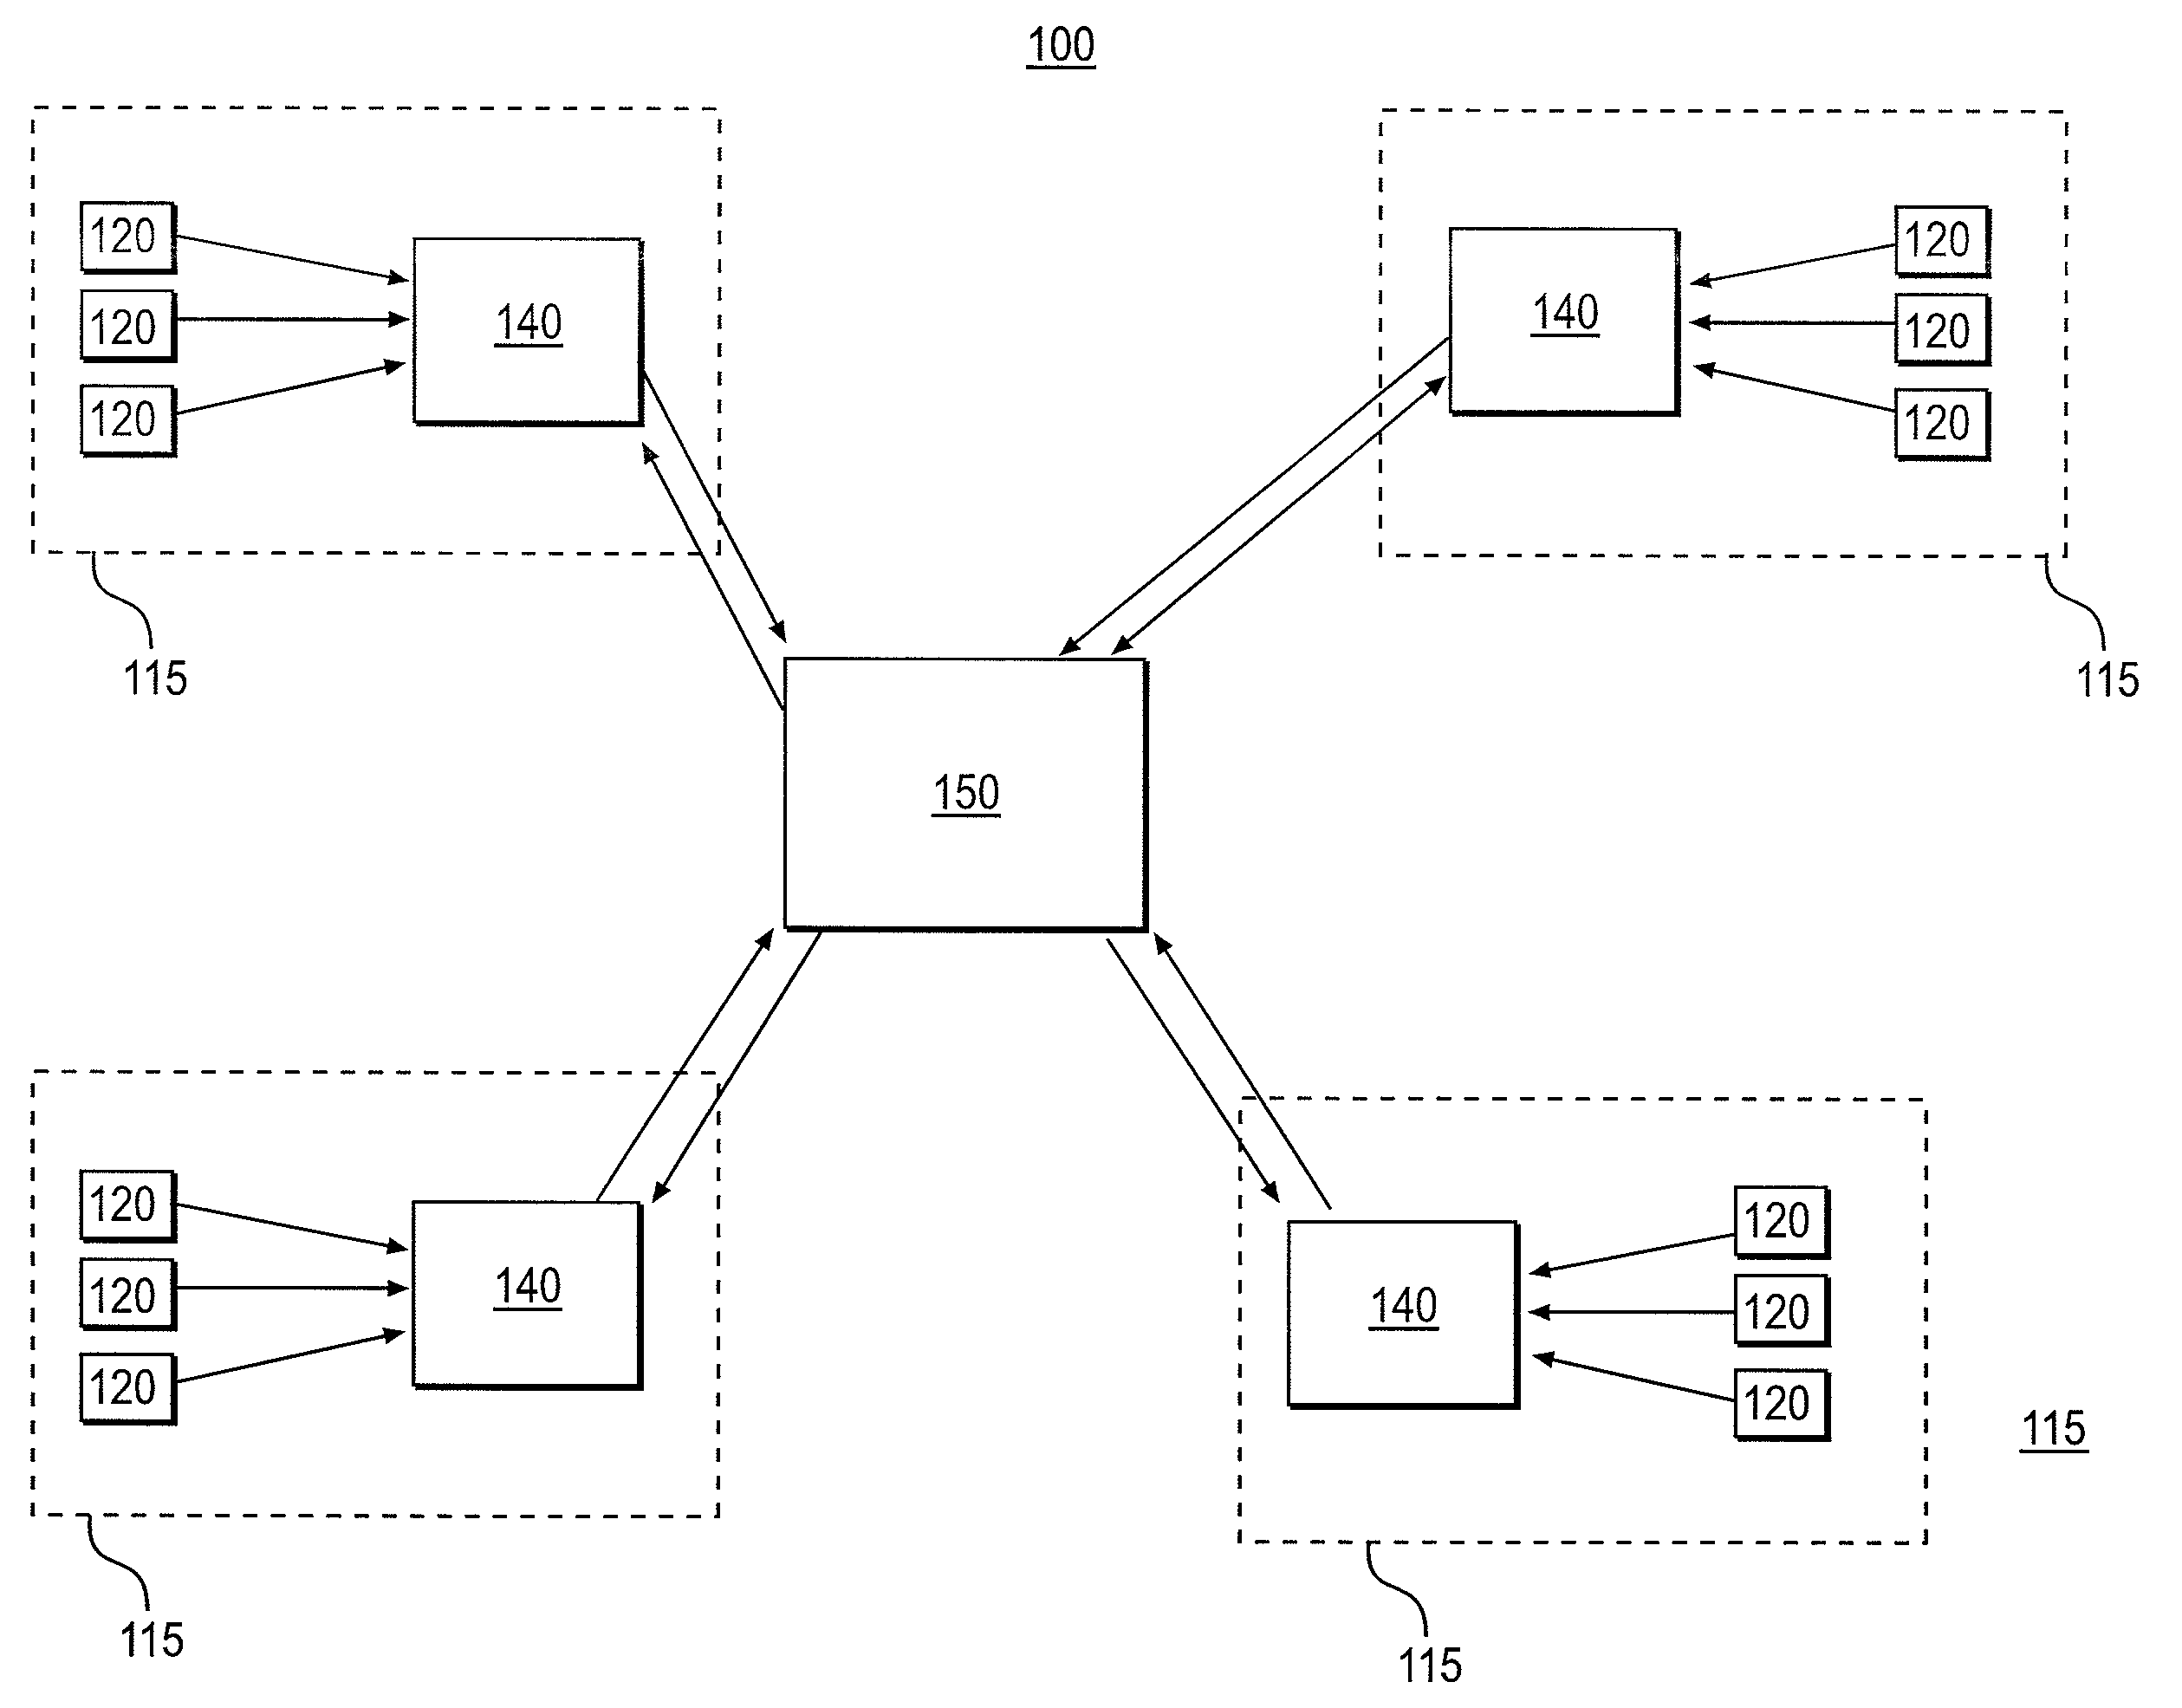 Trigger-based data collection system